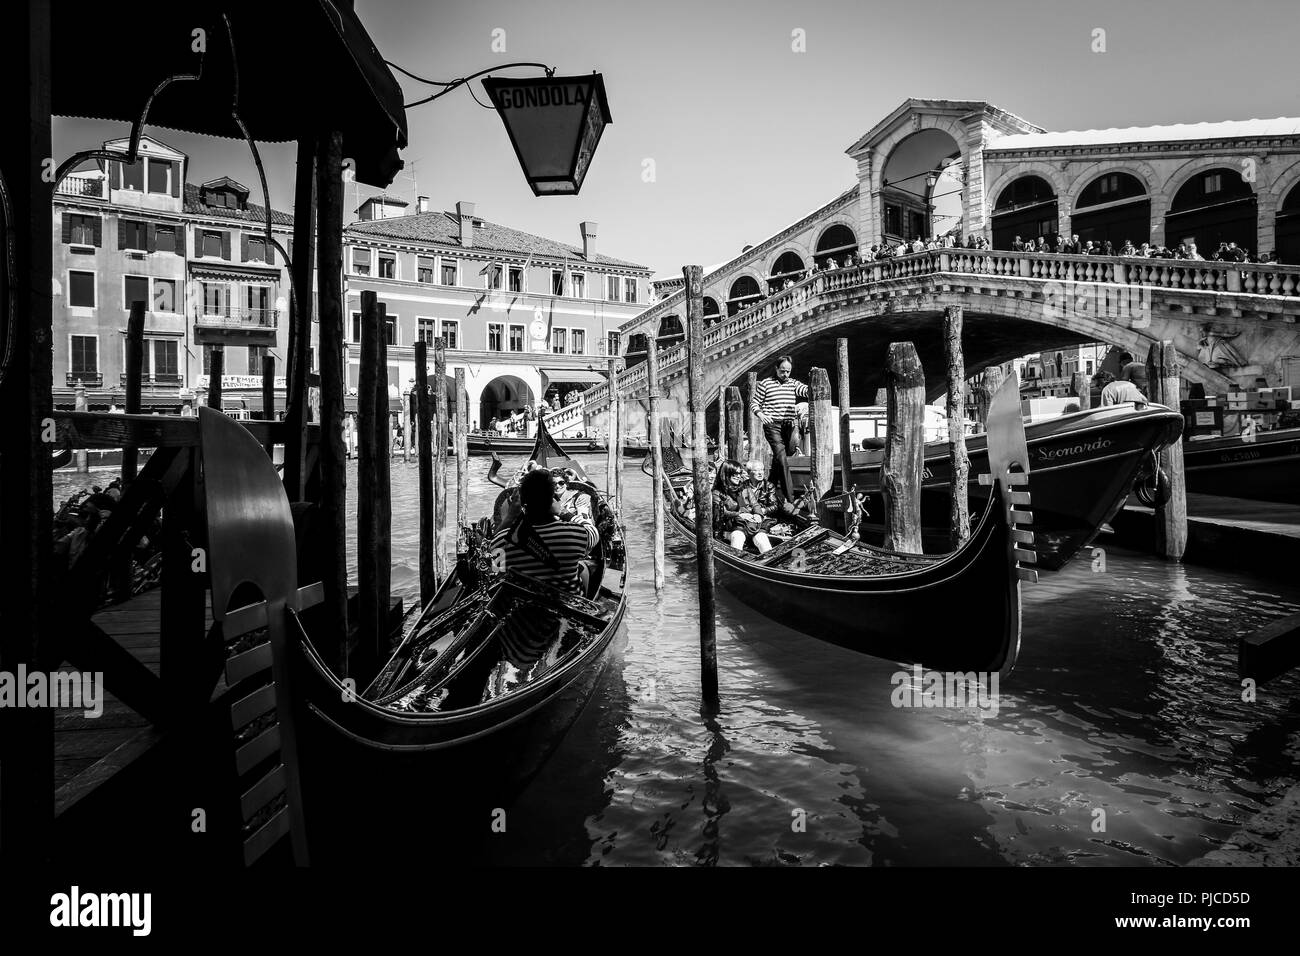 Two gondolas getting ready for a ride on the Grand Canal in Venice, while tourists watching the scene from the Rialto Bridge in the background Stock Photo